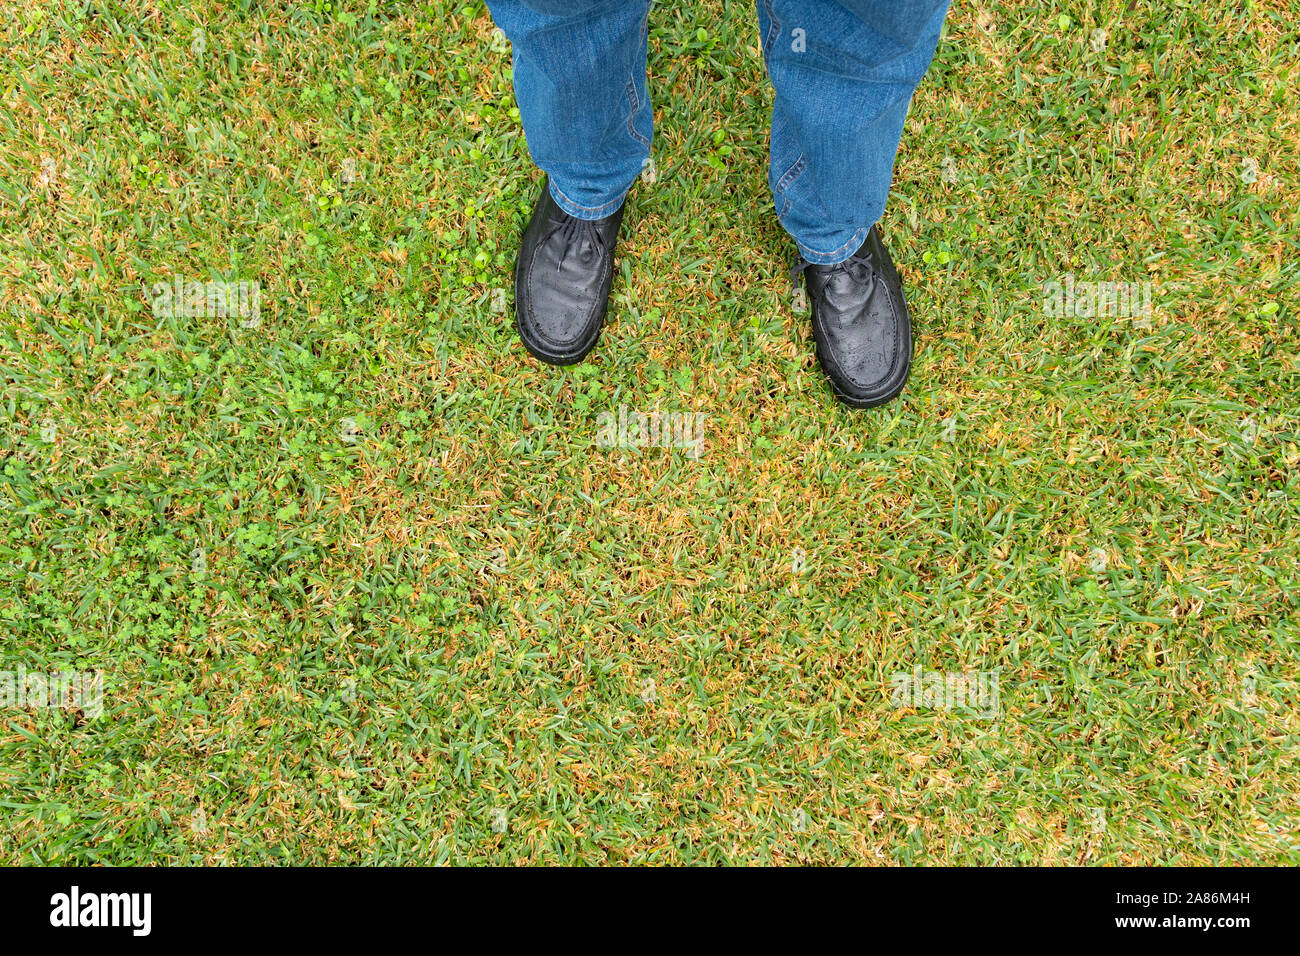 Man legs with blue jeans and black shoes on wet sward. Rainy day Stock Photo